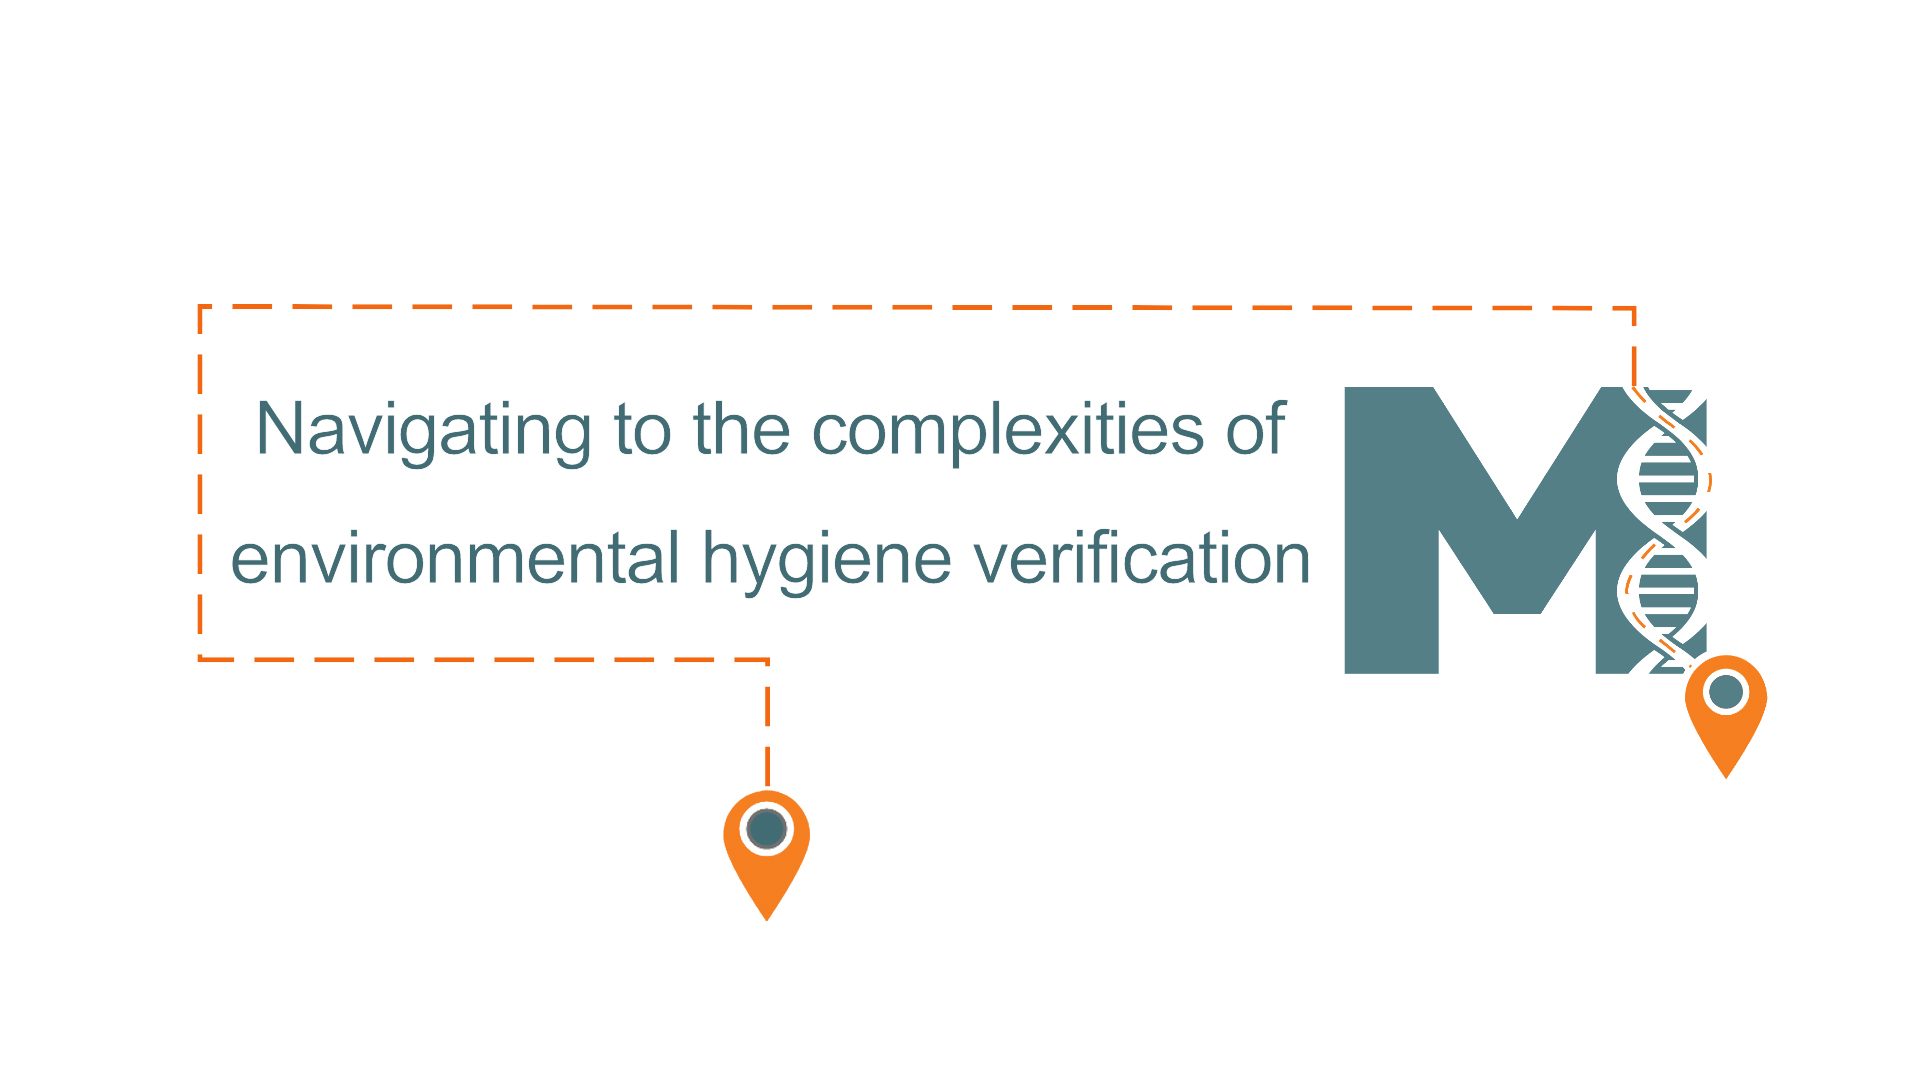 Navigating to the complexities of environmental hygiene verification